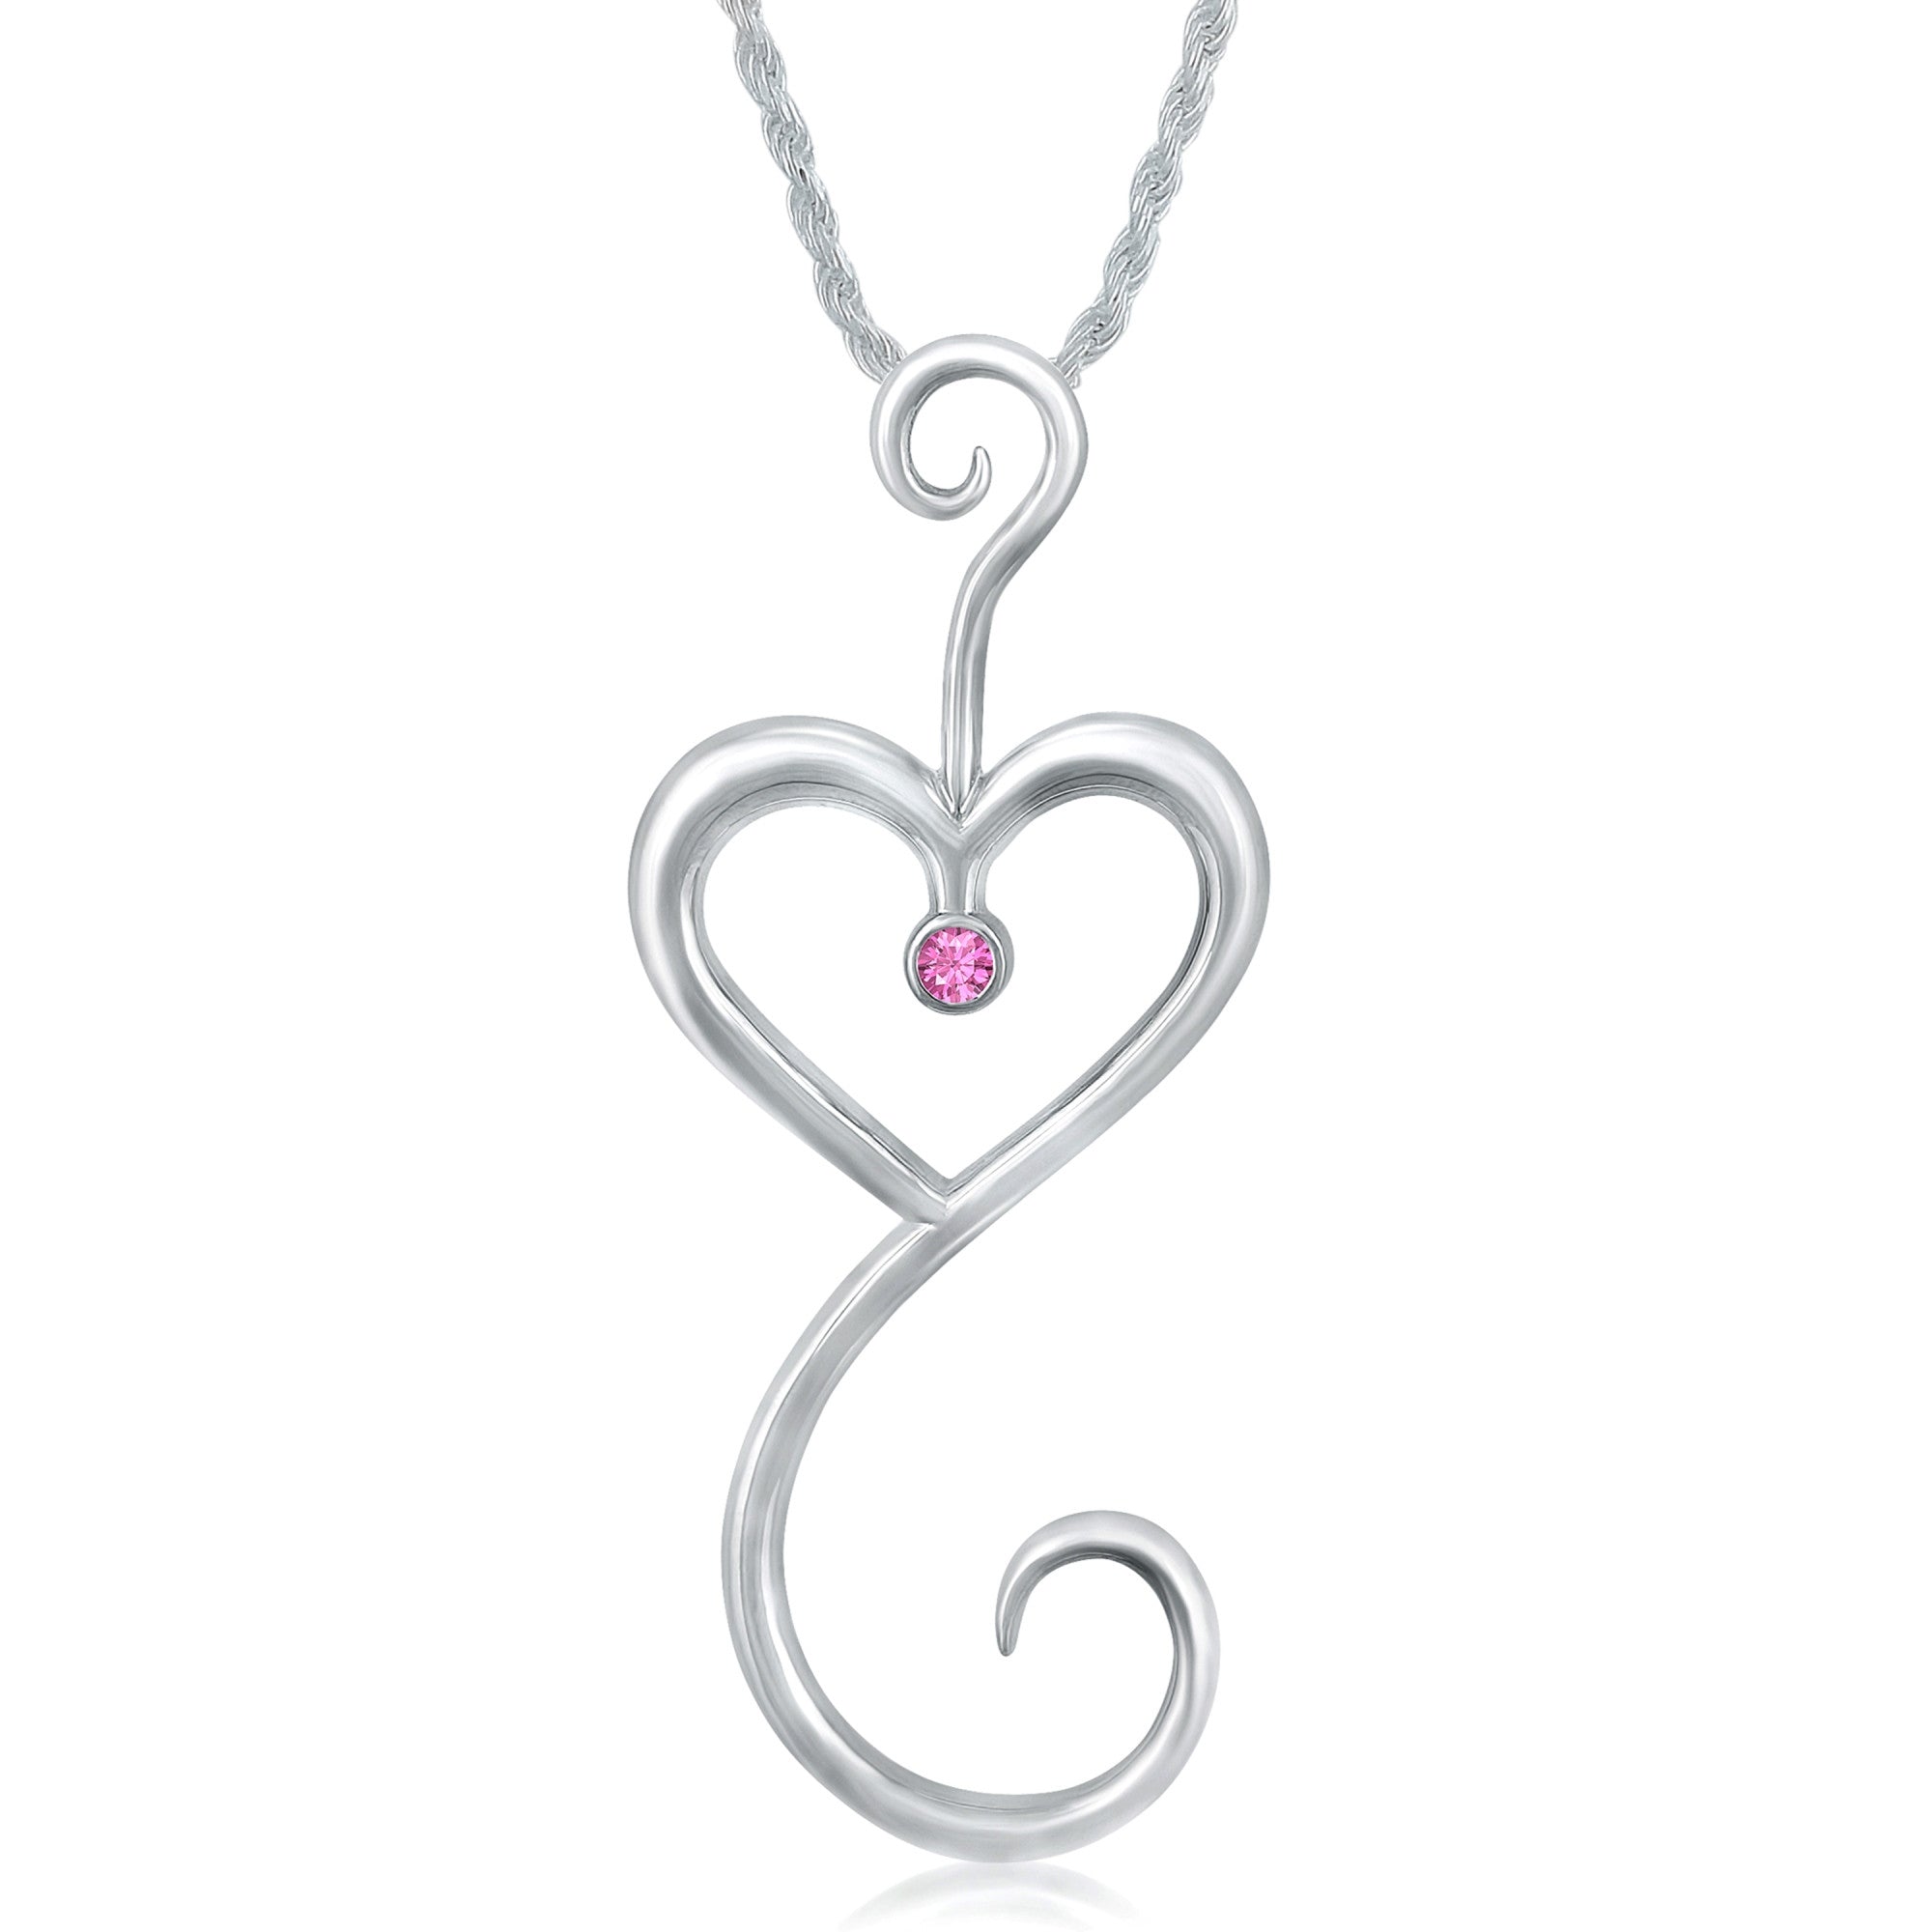 Intrikit Heart - Solid Sterling *Non Tarnish* Silver .925 with a 3mm Pink Sapphire Center Stone